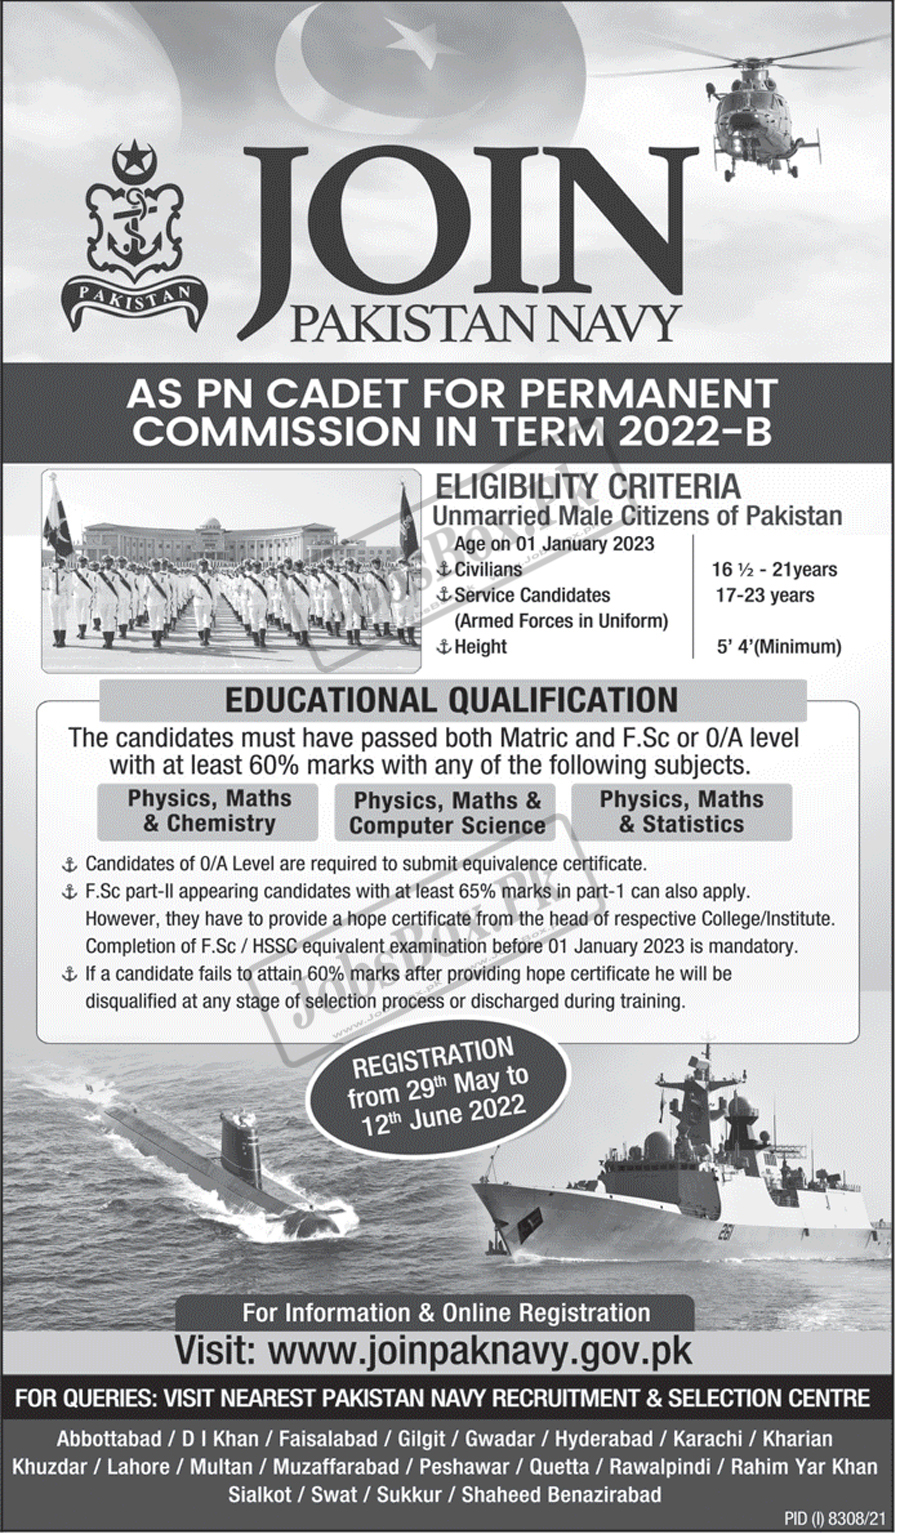 Join Pak Navy Jobs 2022 as PN Cadet Permanent Commission 2022-B